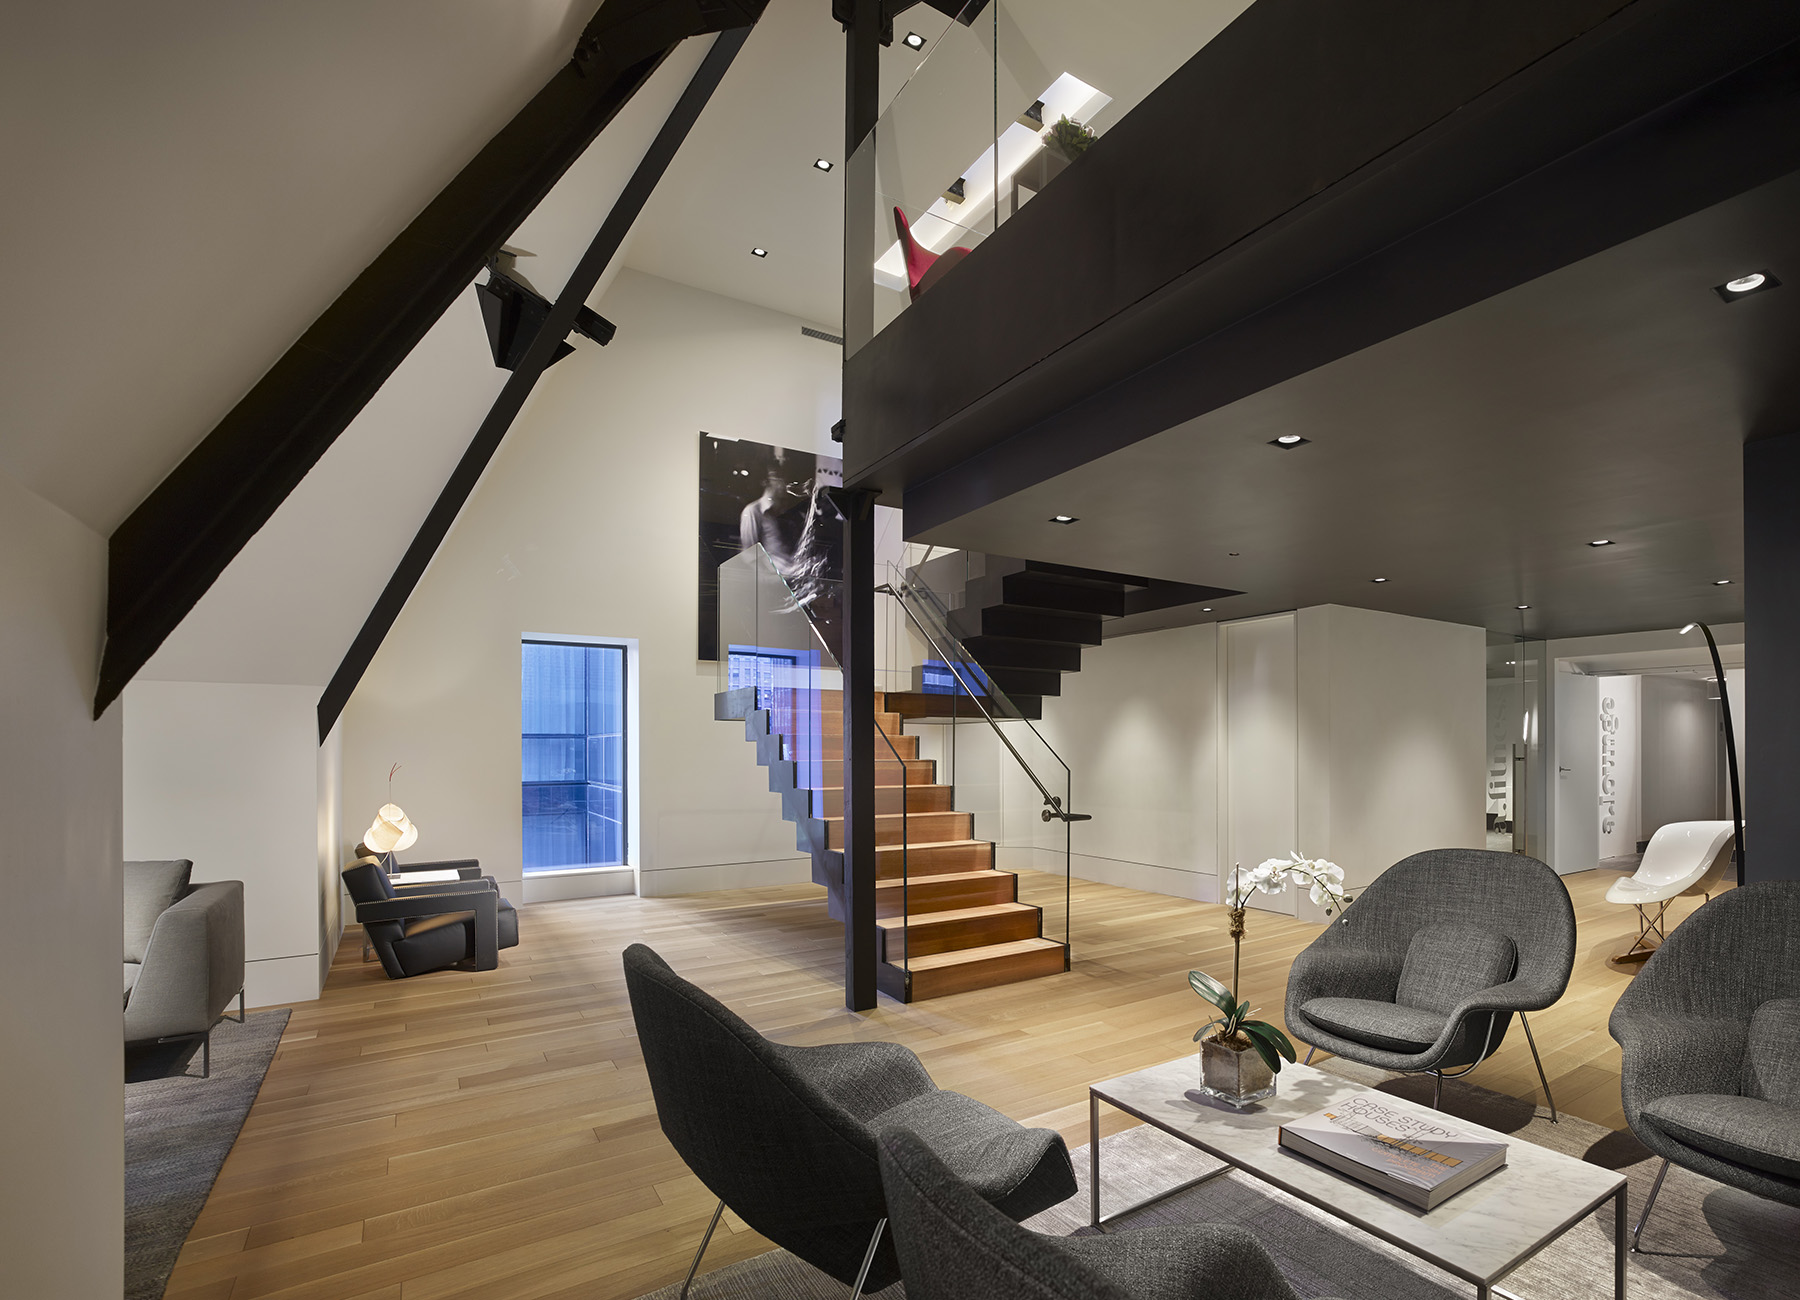 AKA Times Square penthouse lounge with seating options, open staircase, and wooden accents